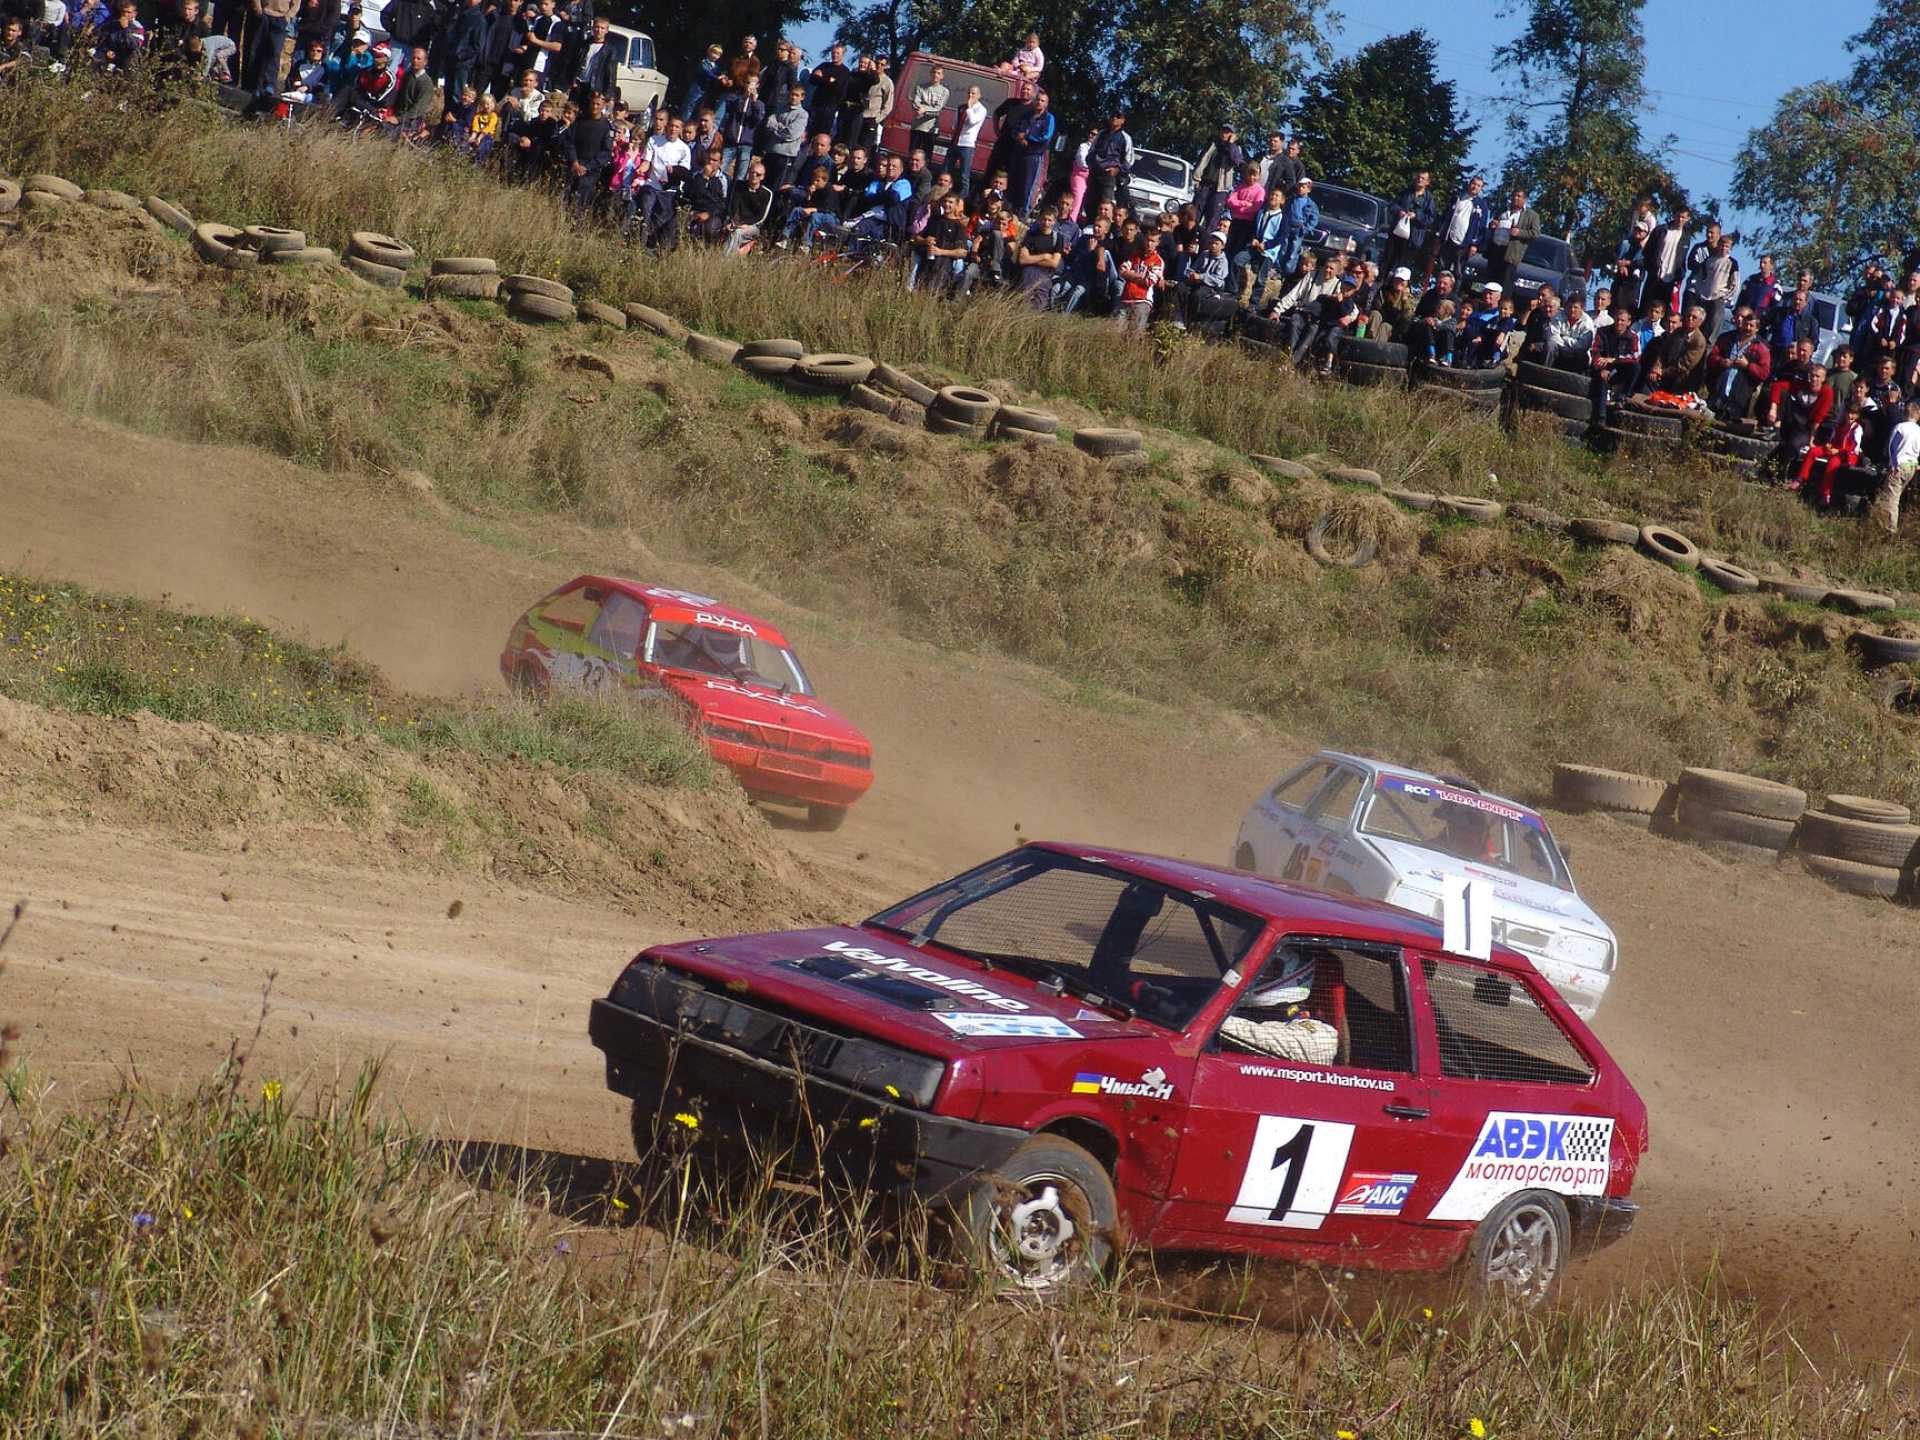 Autocross: Stock cars Rally Championship in Ukraine, Off-road modified Lada cars, Drifting. 1920x1440 HD Background.